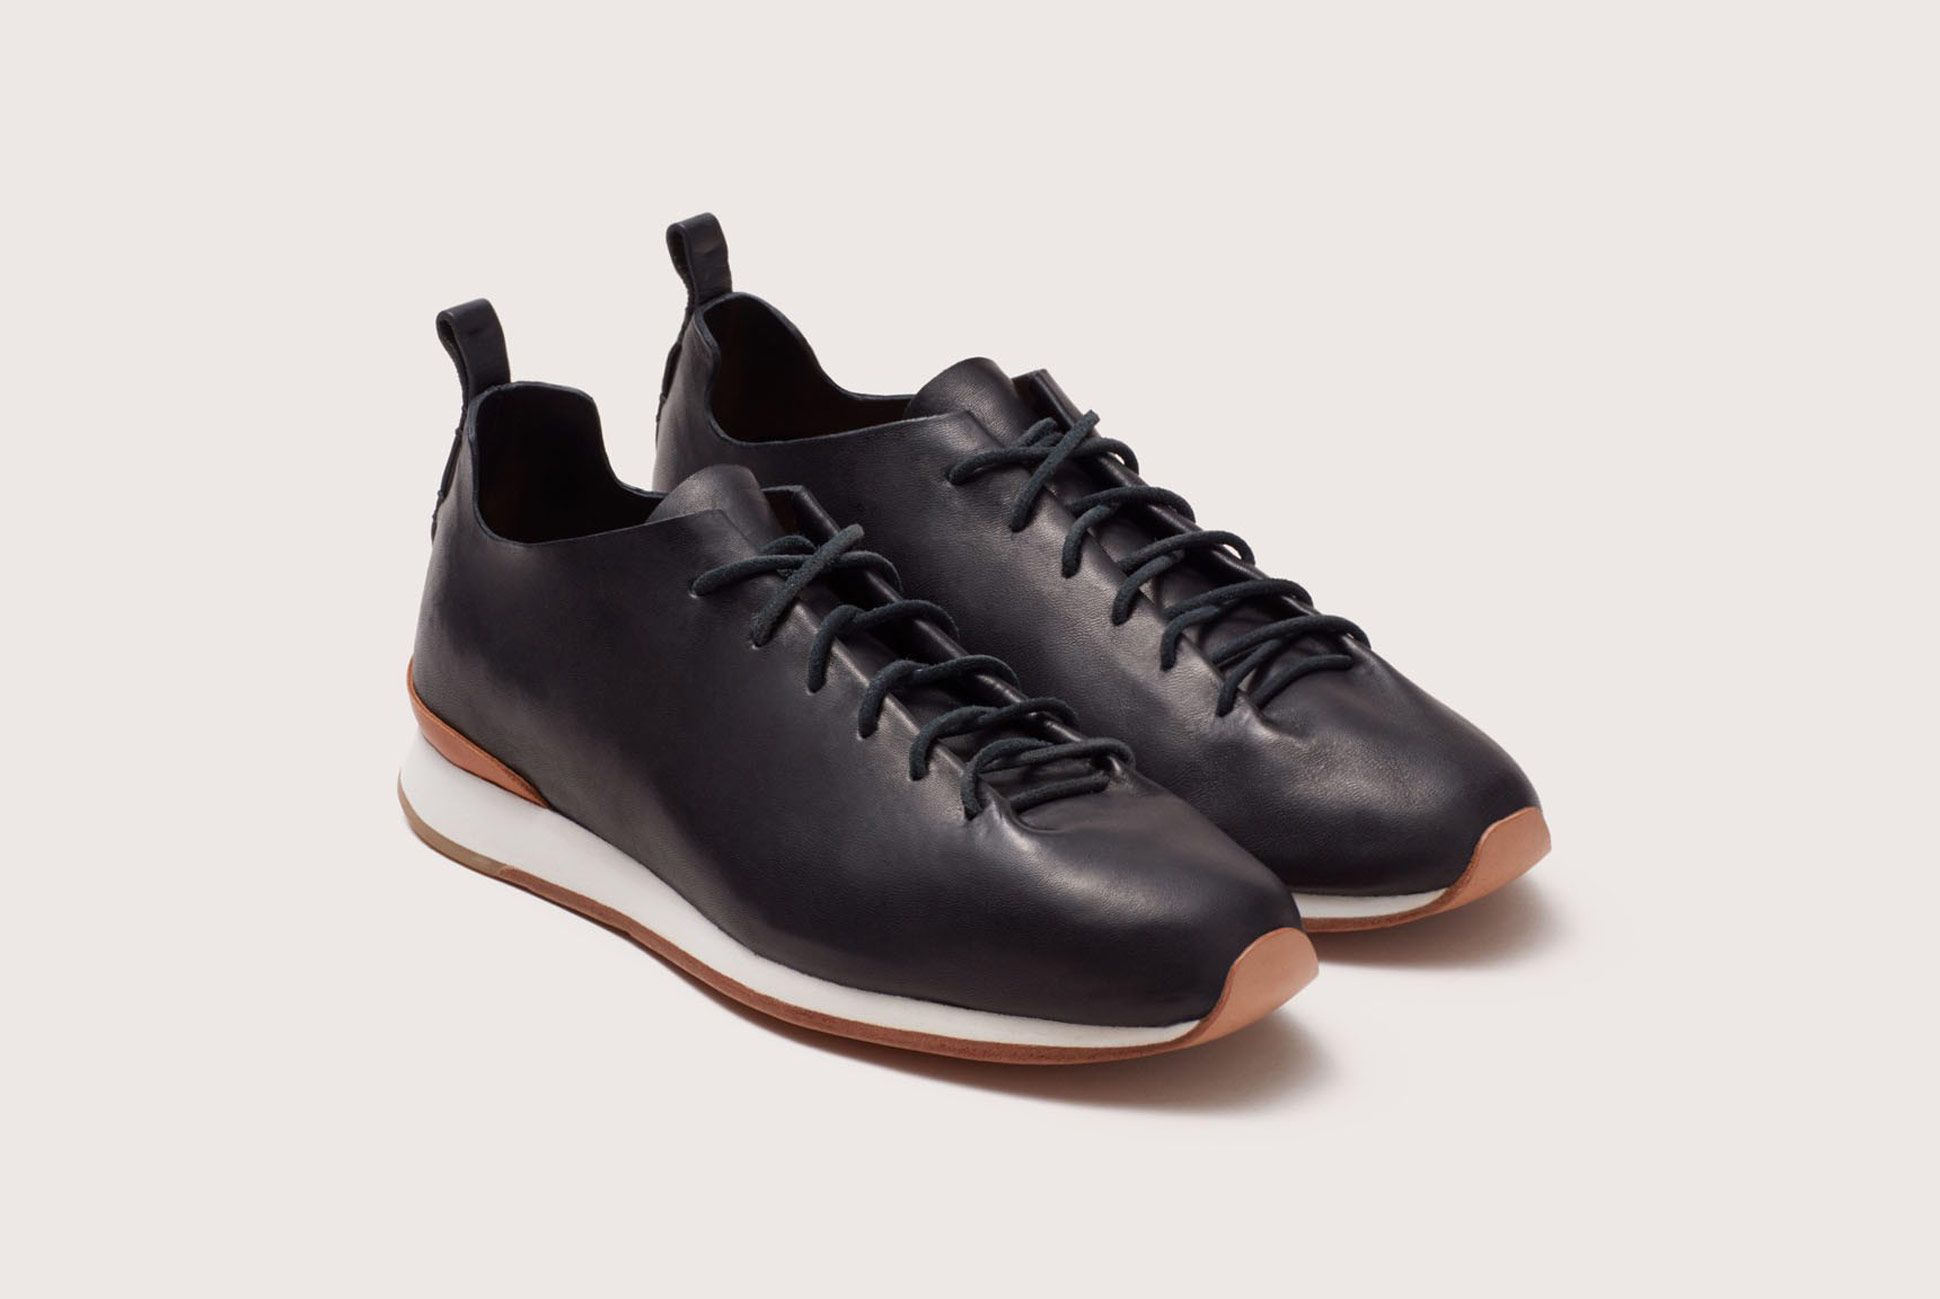 All-Leather Running Shoes with a 